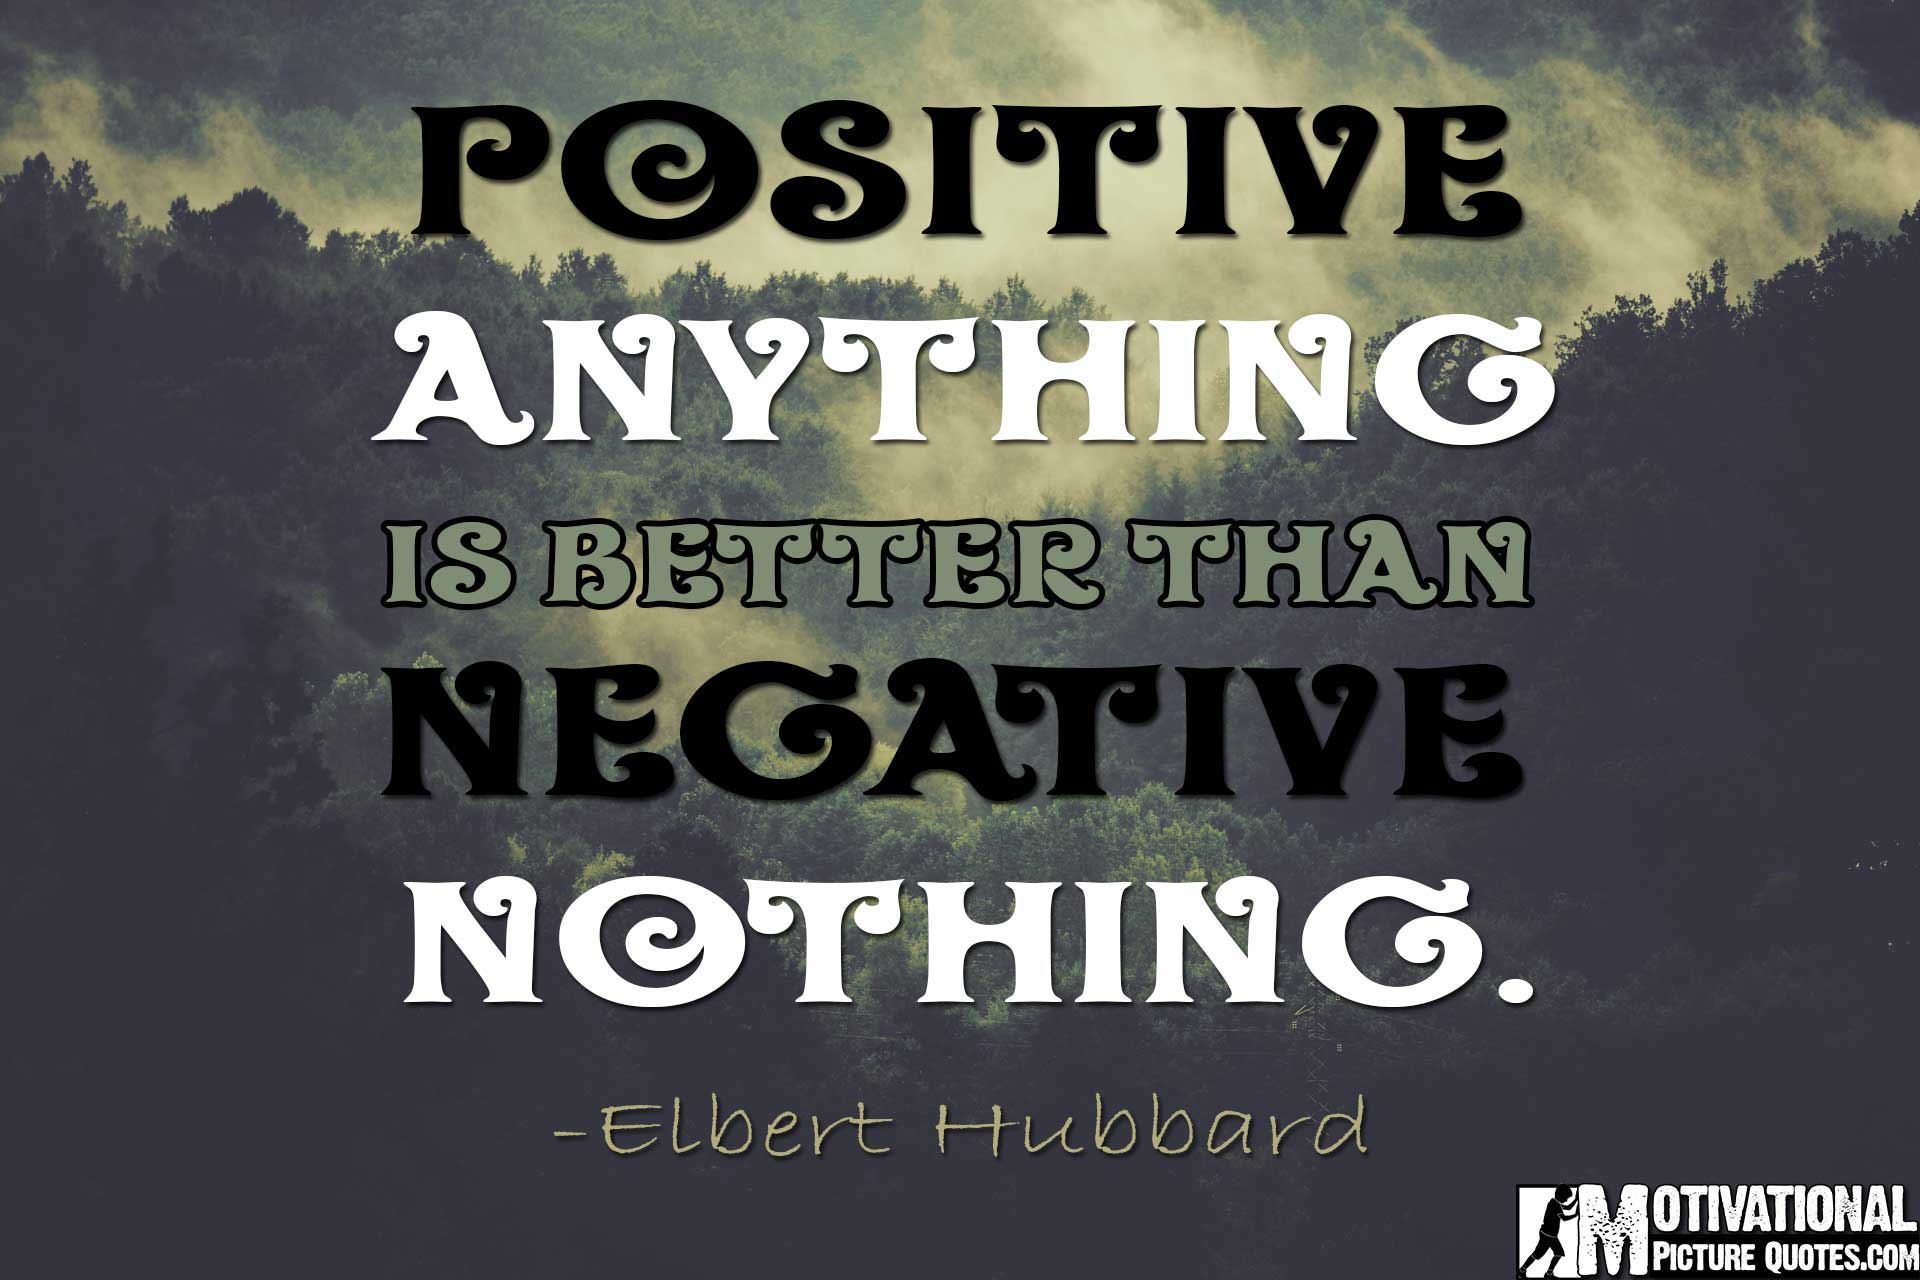 Elbert Hubbard Quote - Inspirational Positive Thinking Famous Quotes - HD Wallpaper 